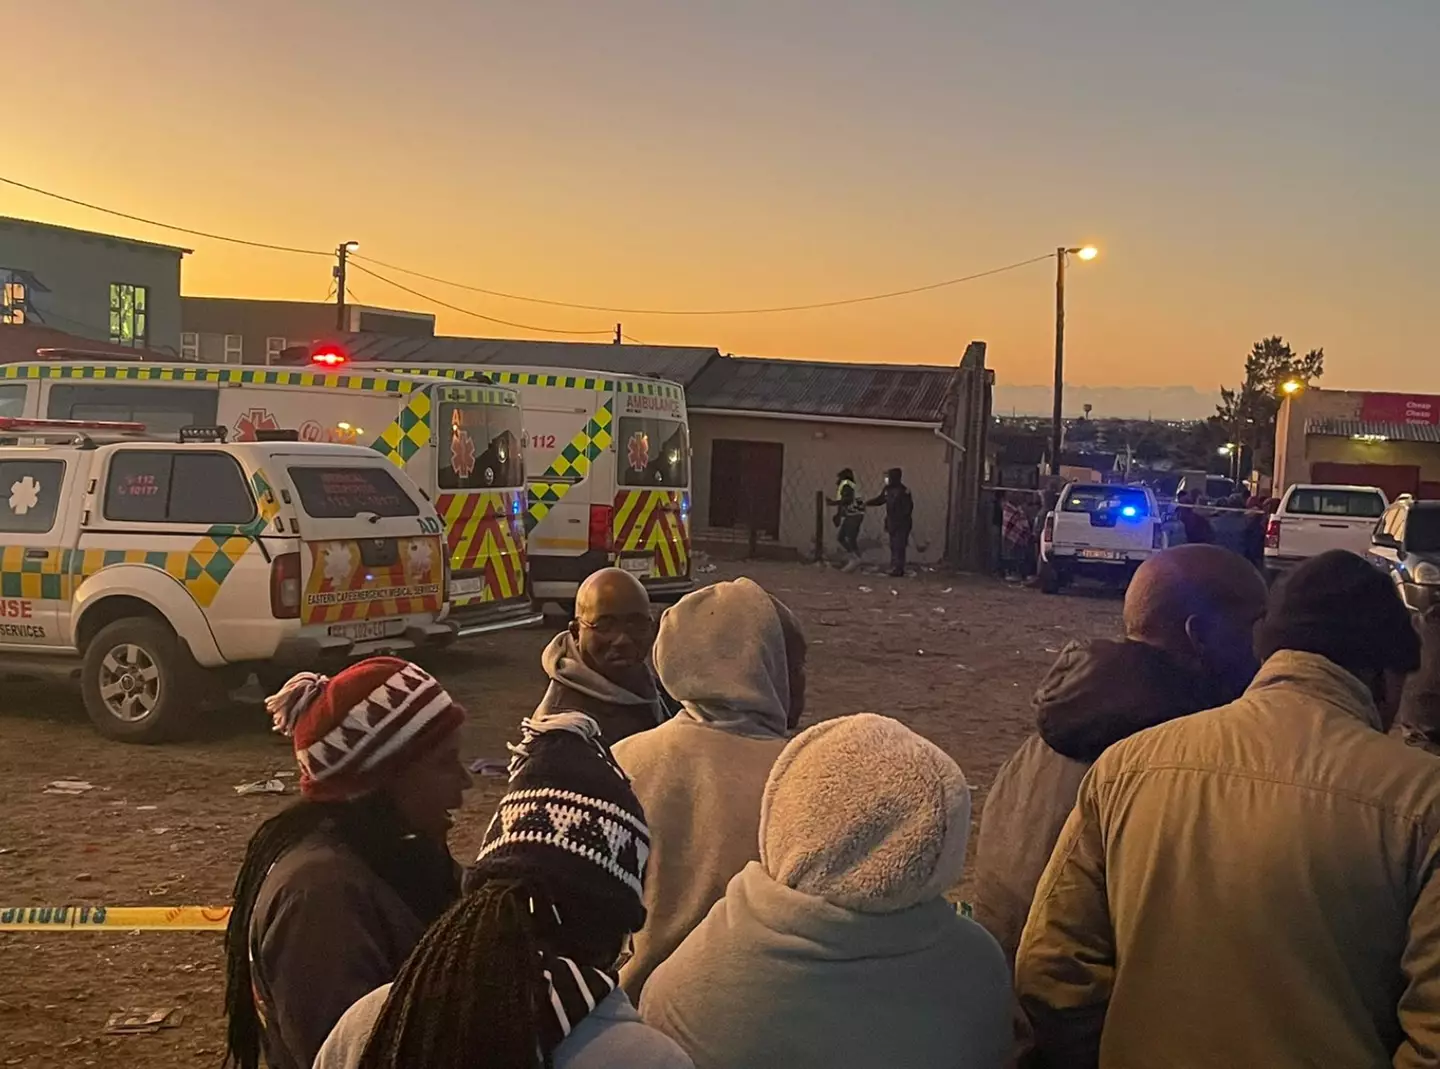 Around 20 people were found having passed away at a club in South Africa.